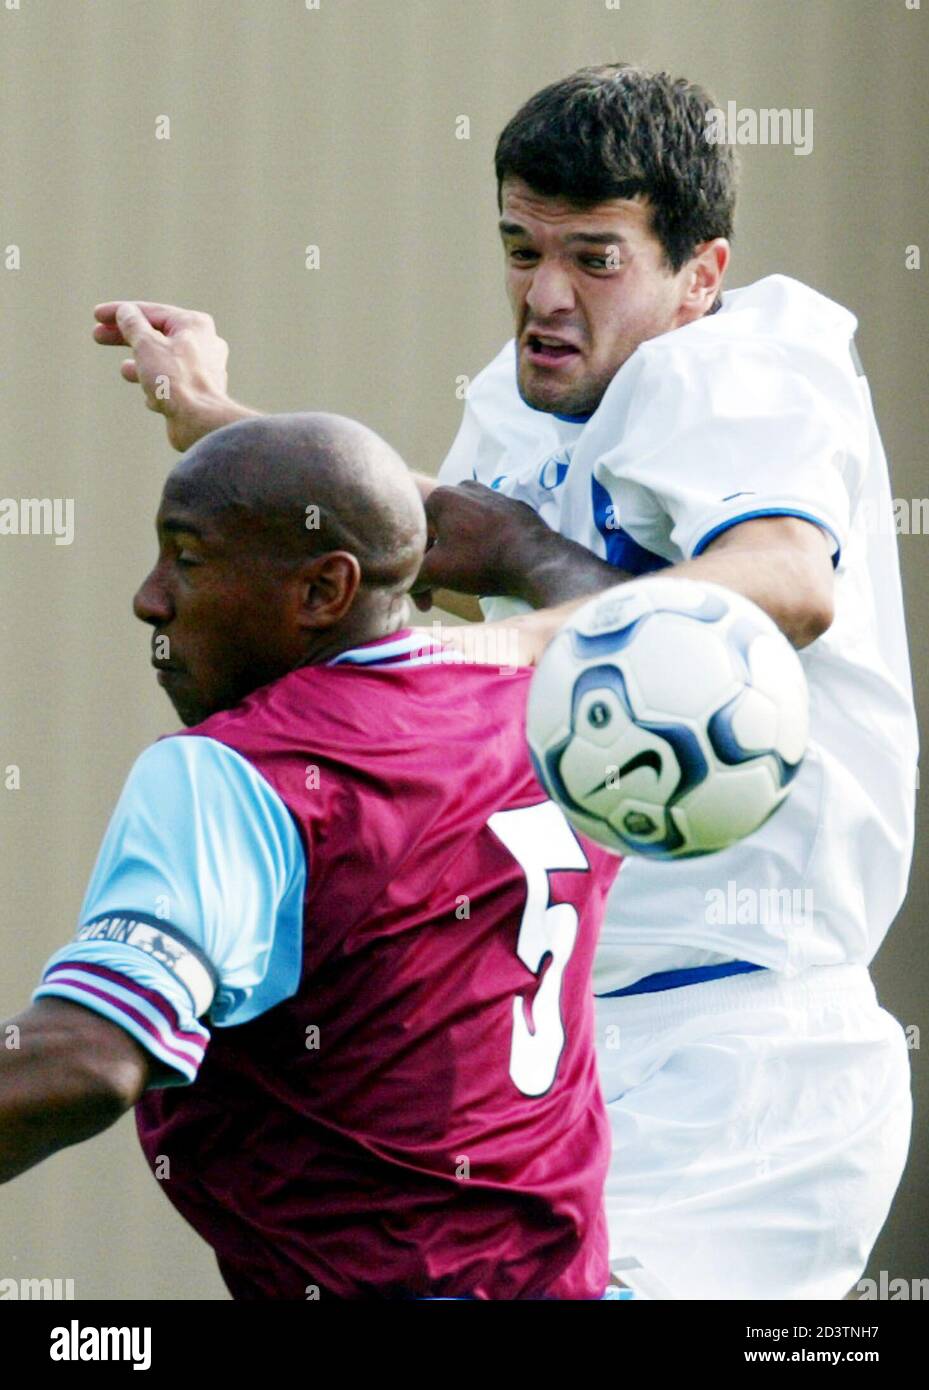 URSAL YASAR AND DION DUBLIN JUMP FOR A HEADER DURING THE UEFA INTERTOTO MATCH FC ZURICH VS. ASTON VILLA.    FC Zurich's Ursal Yasar (R) and Aston Villa's Dion Dublin (L) jump for a header during their UEFA Intertoto third round, first leg soccer match in Zurich on July 21, 2002. REUTERS/Andreas Meier Stock Photo